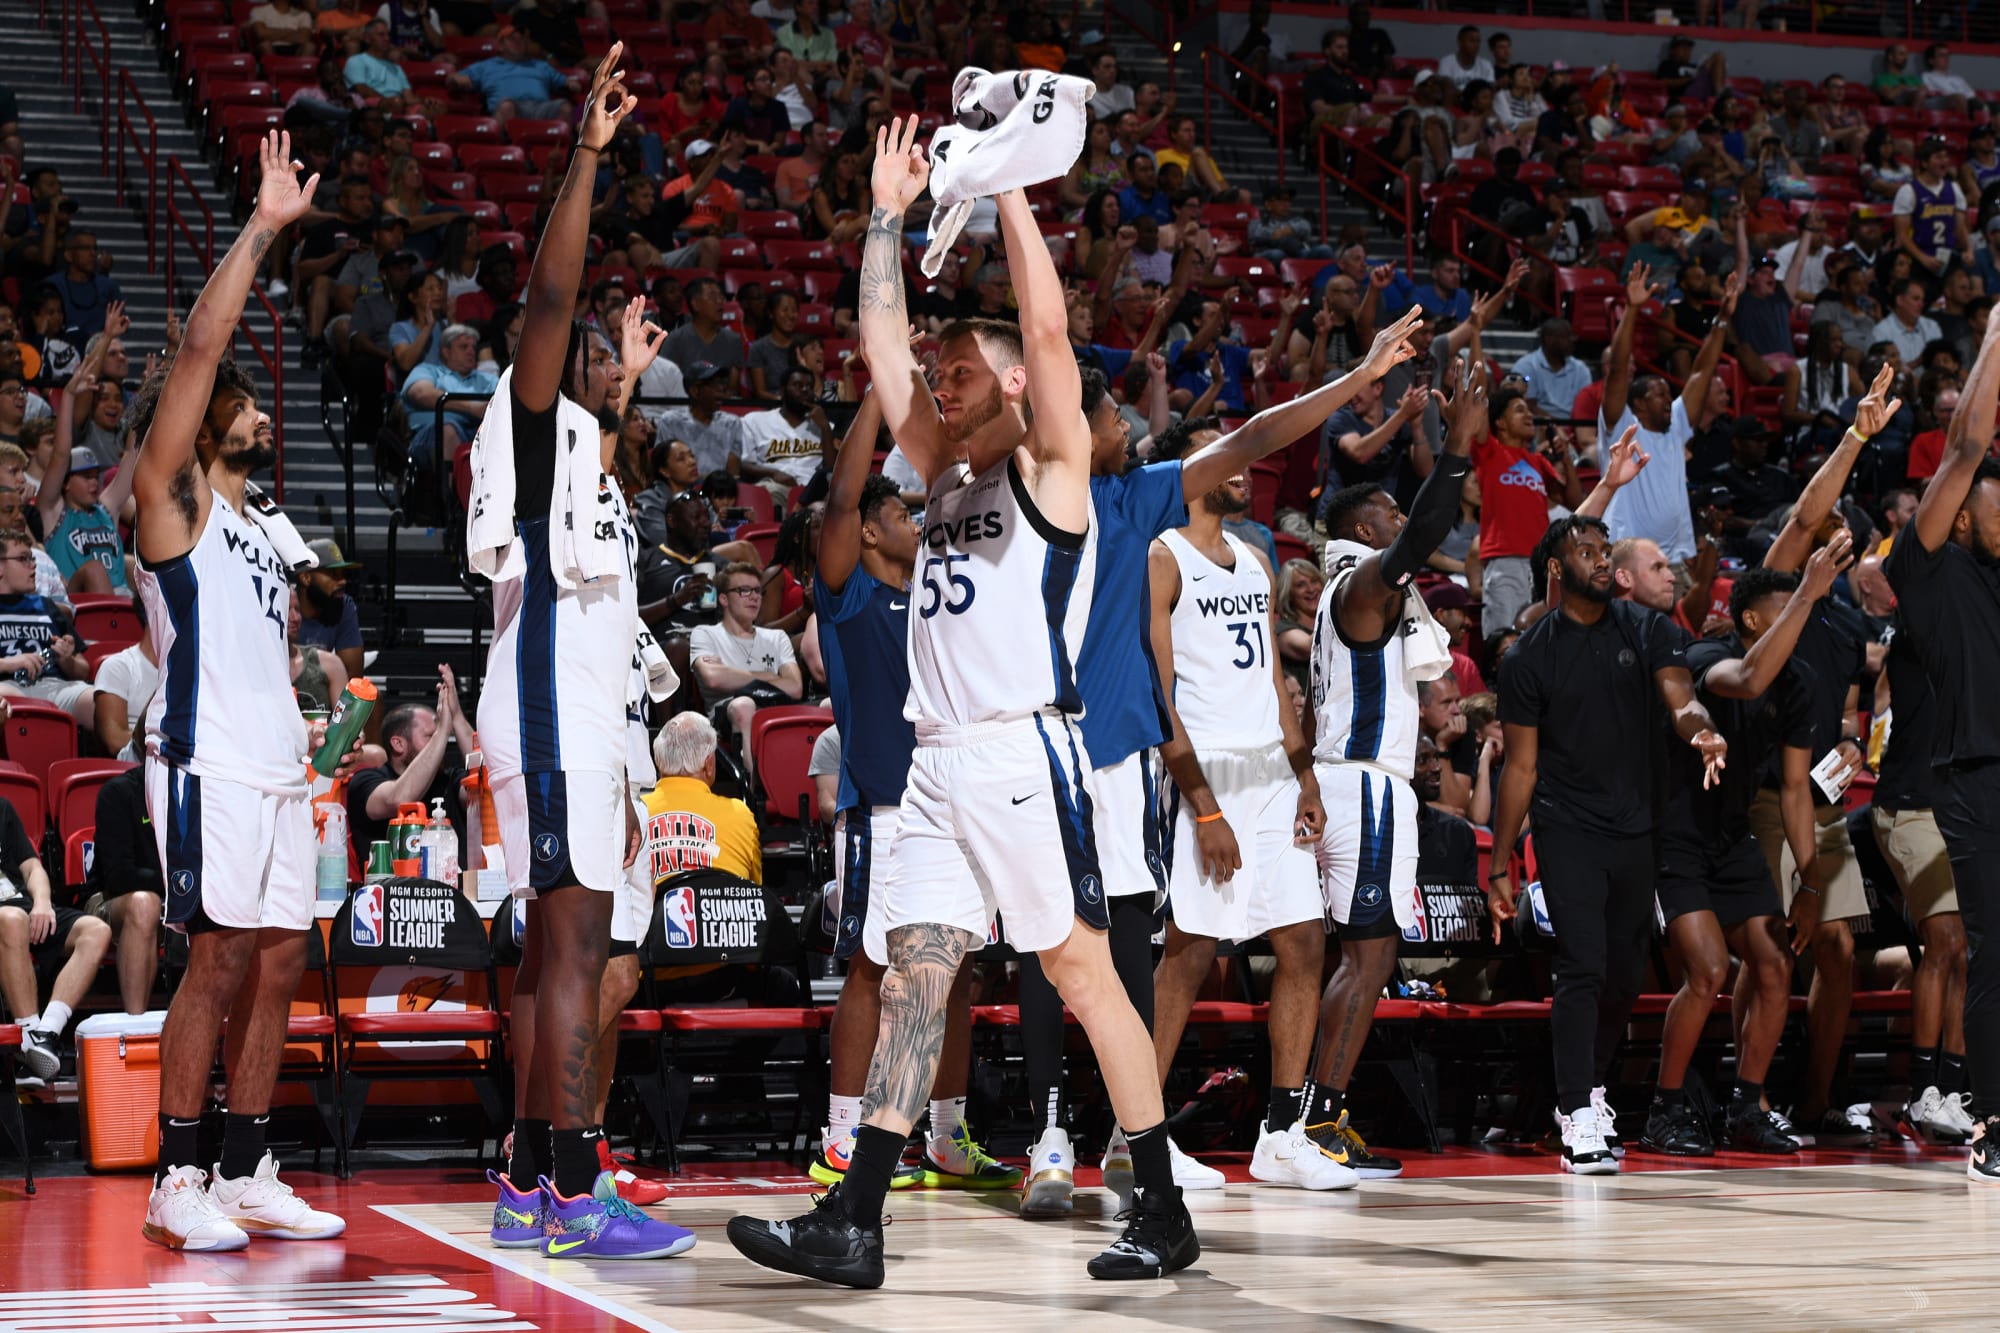 3 key takeaways from the Minnesota Timberwolves at Summer League